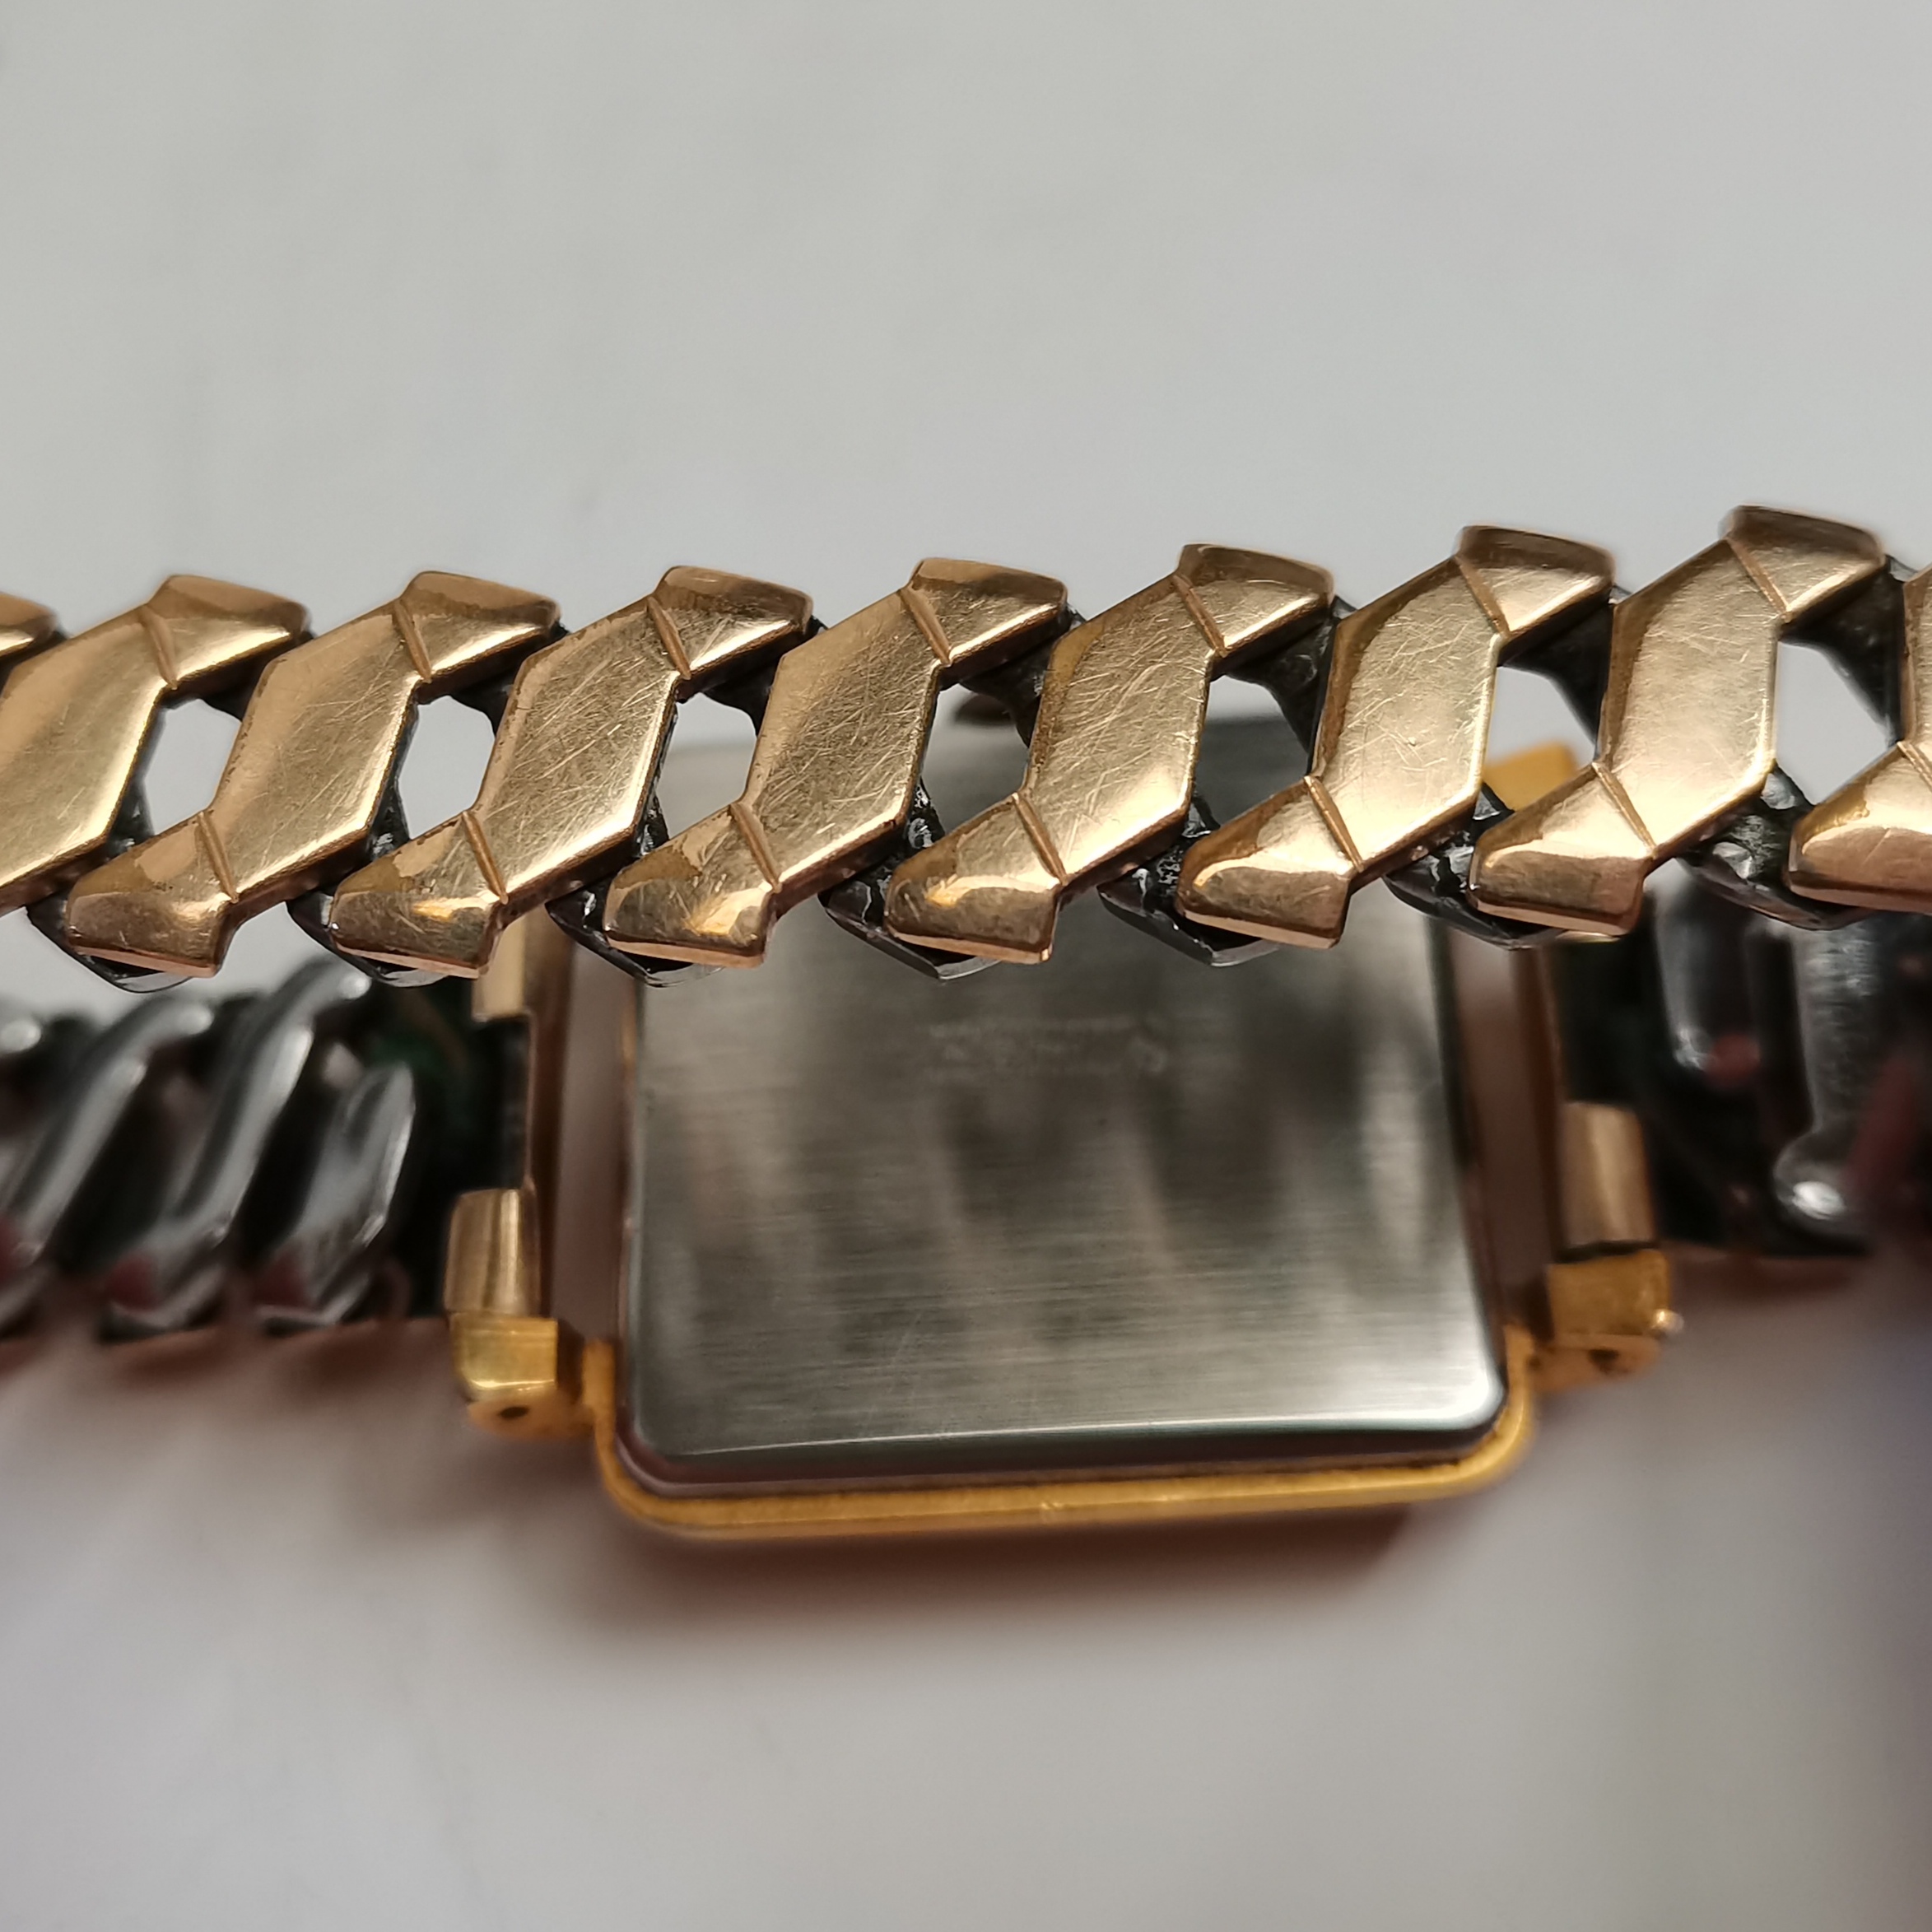 ORIS gold plated gents watch working - Image 2 of 2